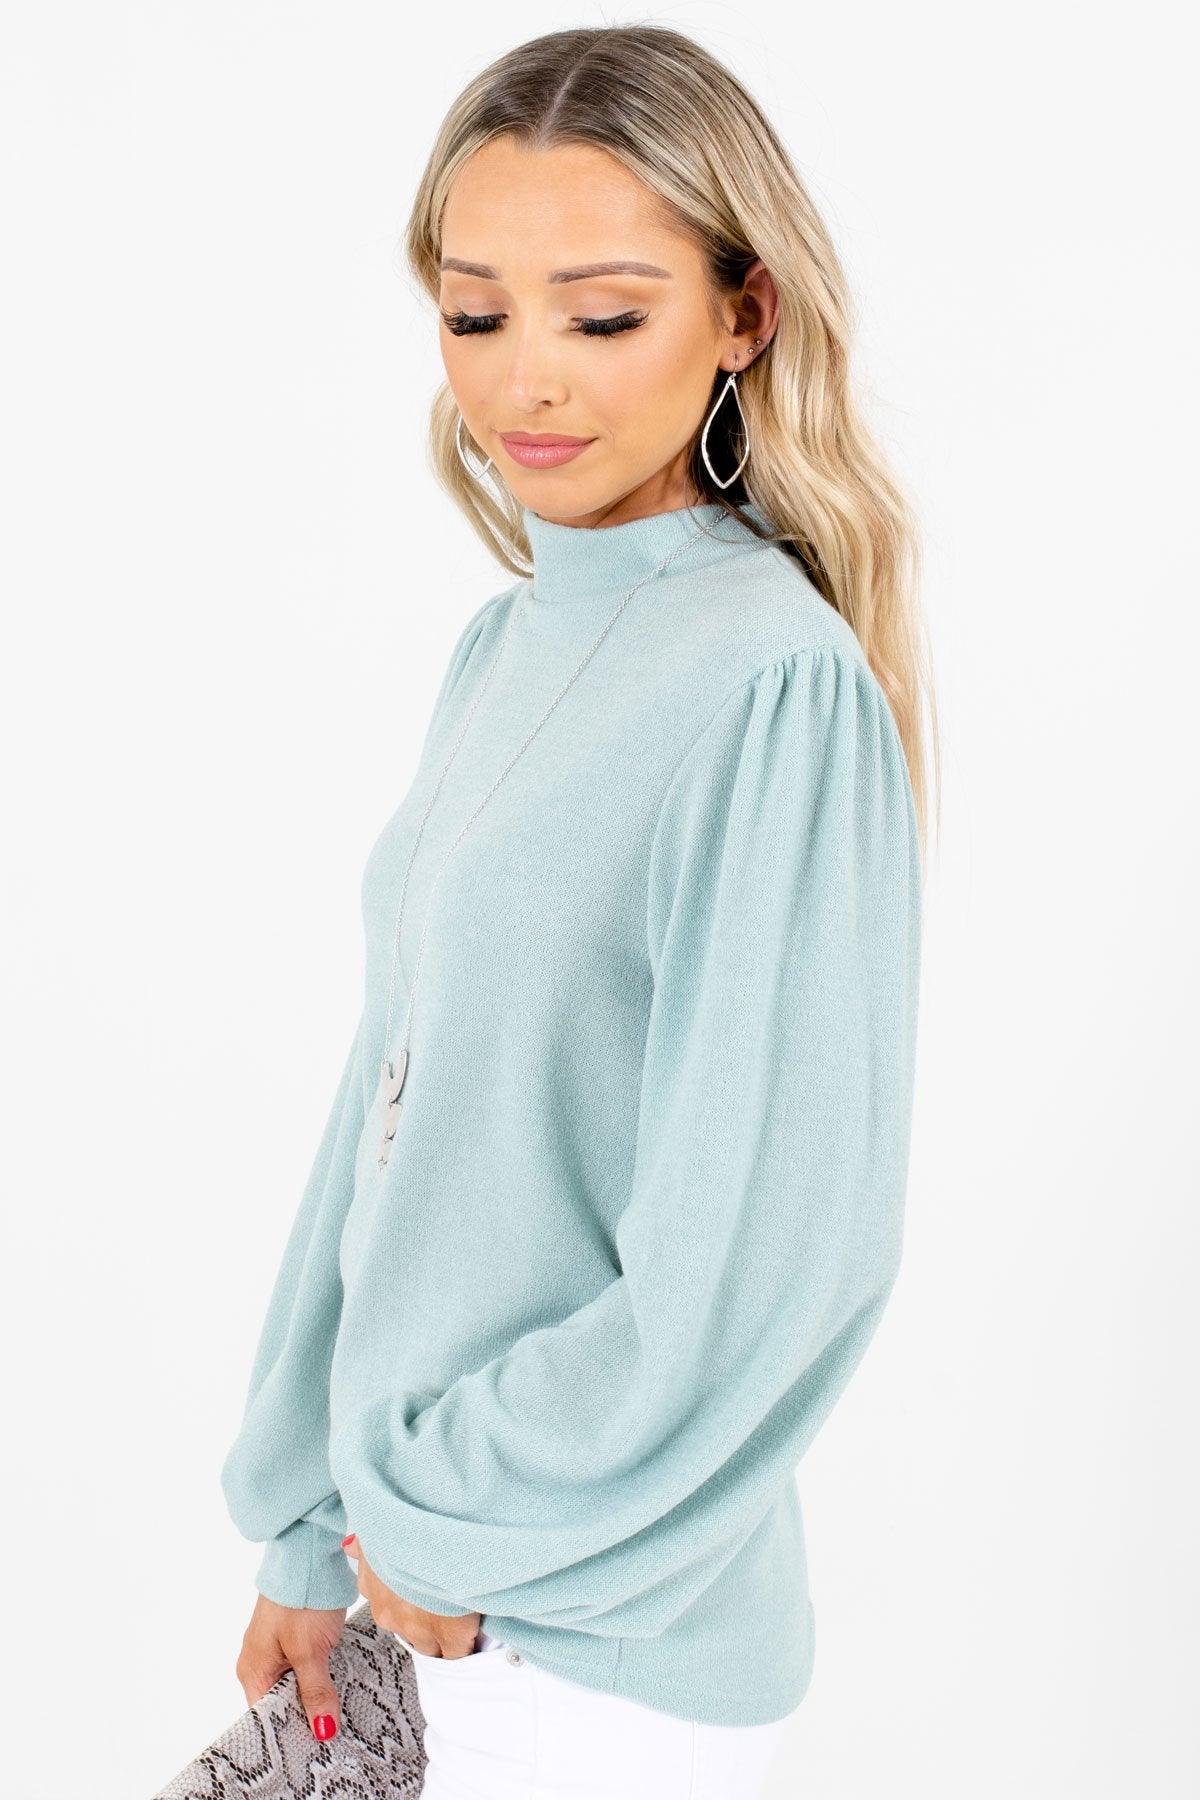 Sage Cute and Comfortable Boutique Tops for Women